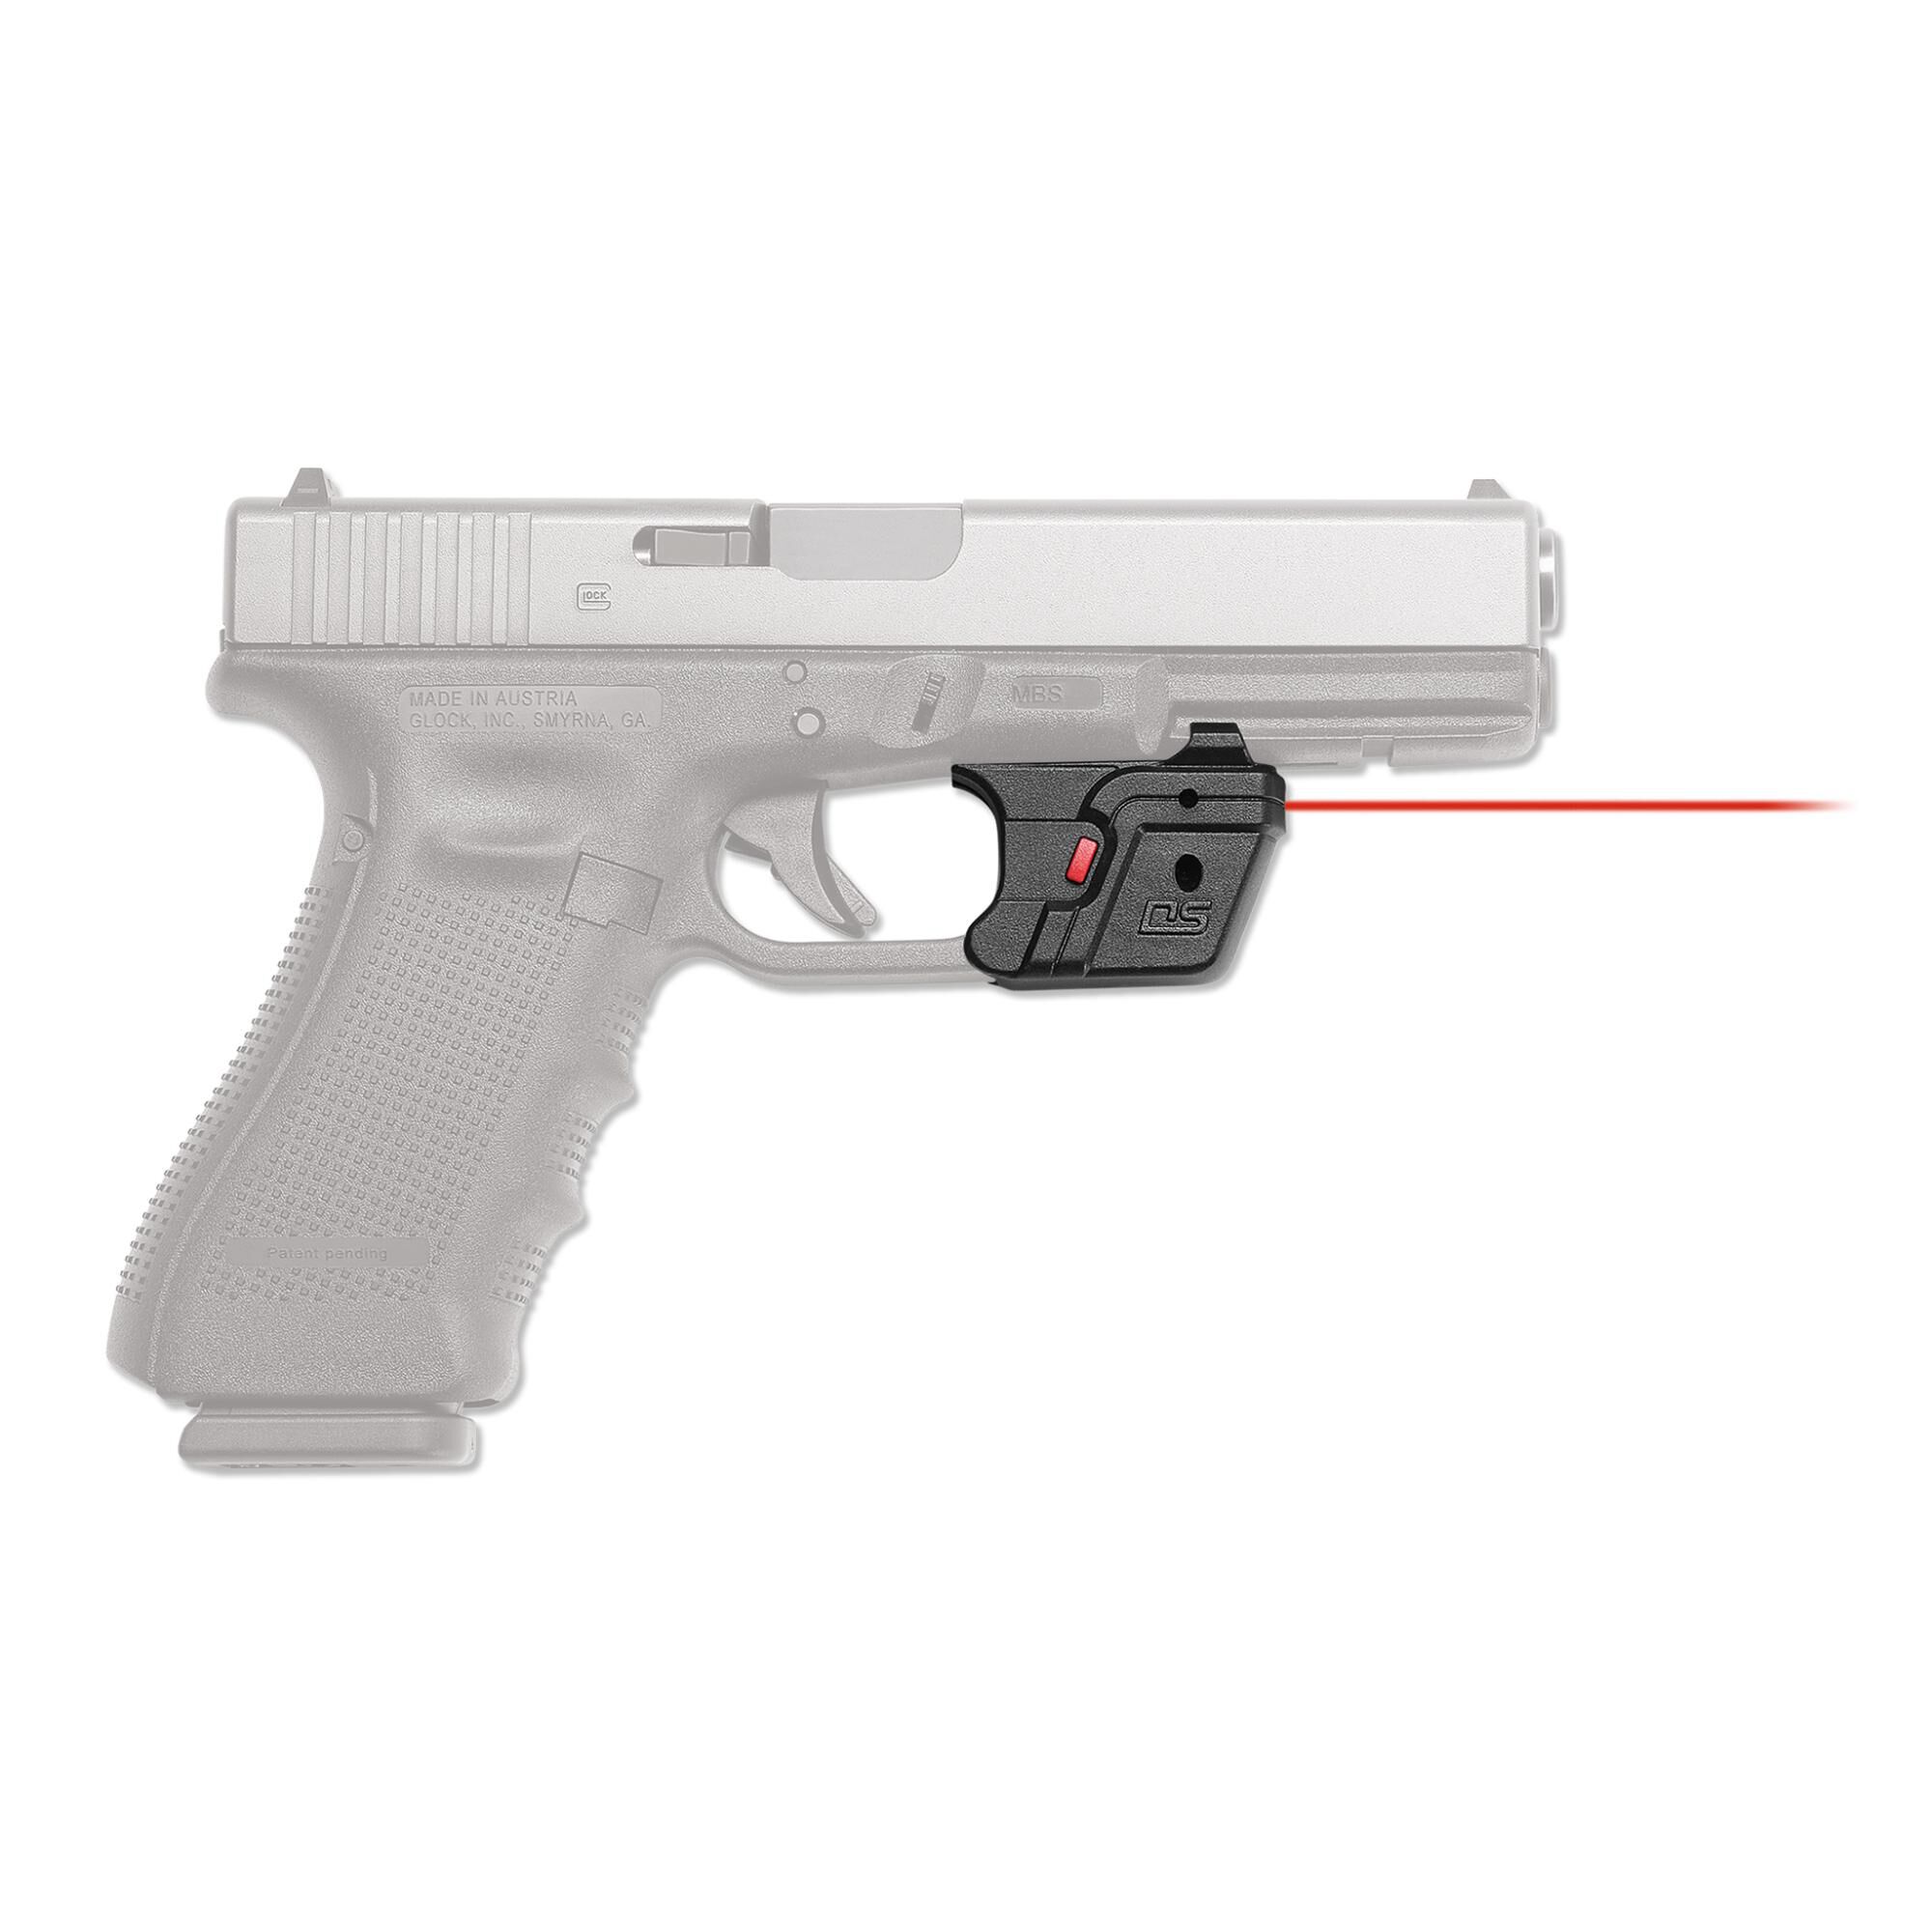 Tactical Red Laser sight For PISTOL/Glock17 19 20 21 22 31 32 34 35 37 W Switch 